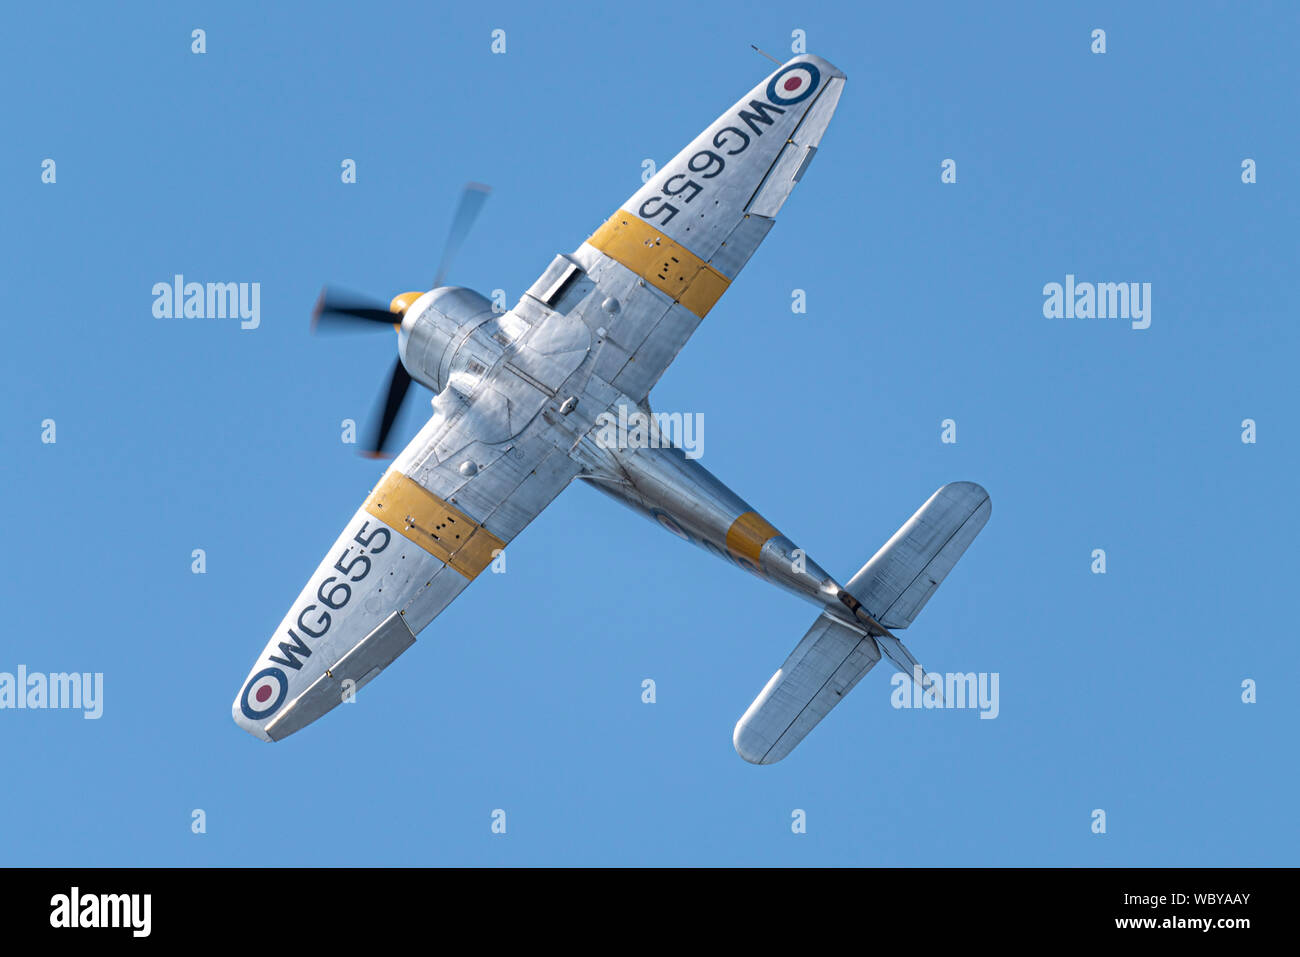 Hawker Sea Fury T.20 Second World War fighter plane flying at the Children in Need Little Gransden Air & Car Show airshow, UK. Stock Photo